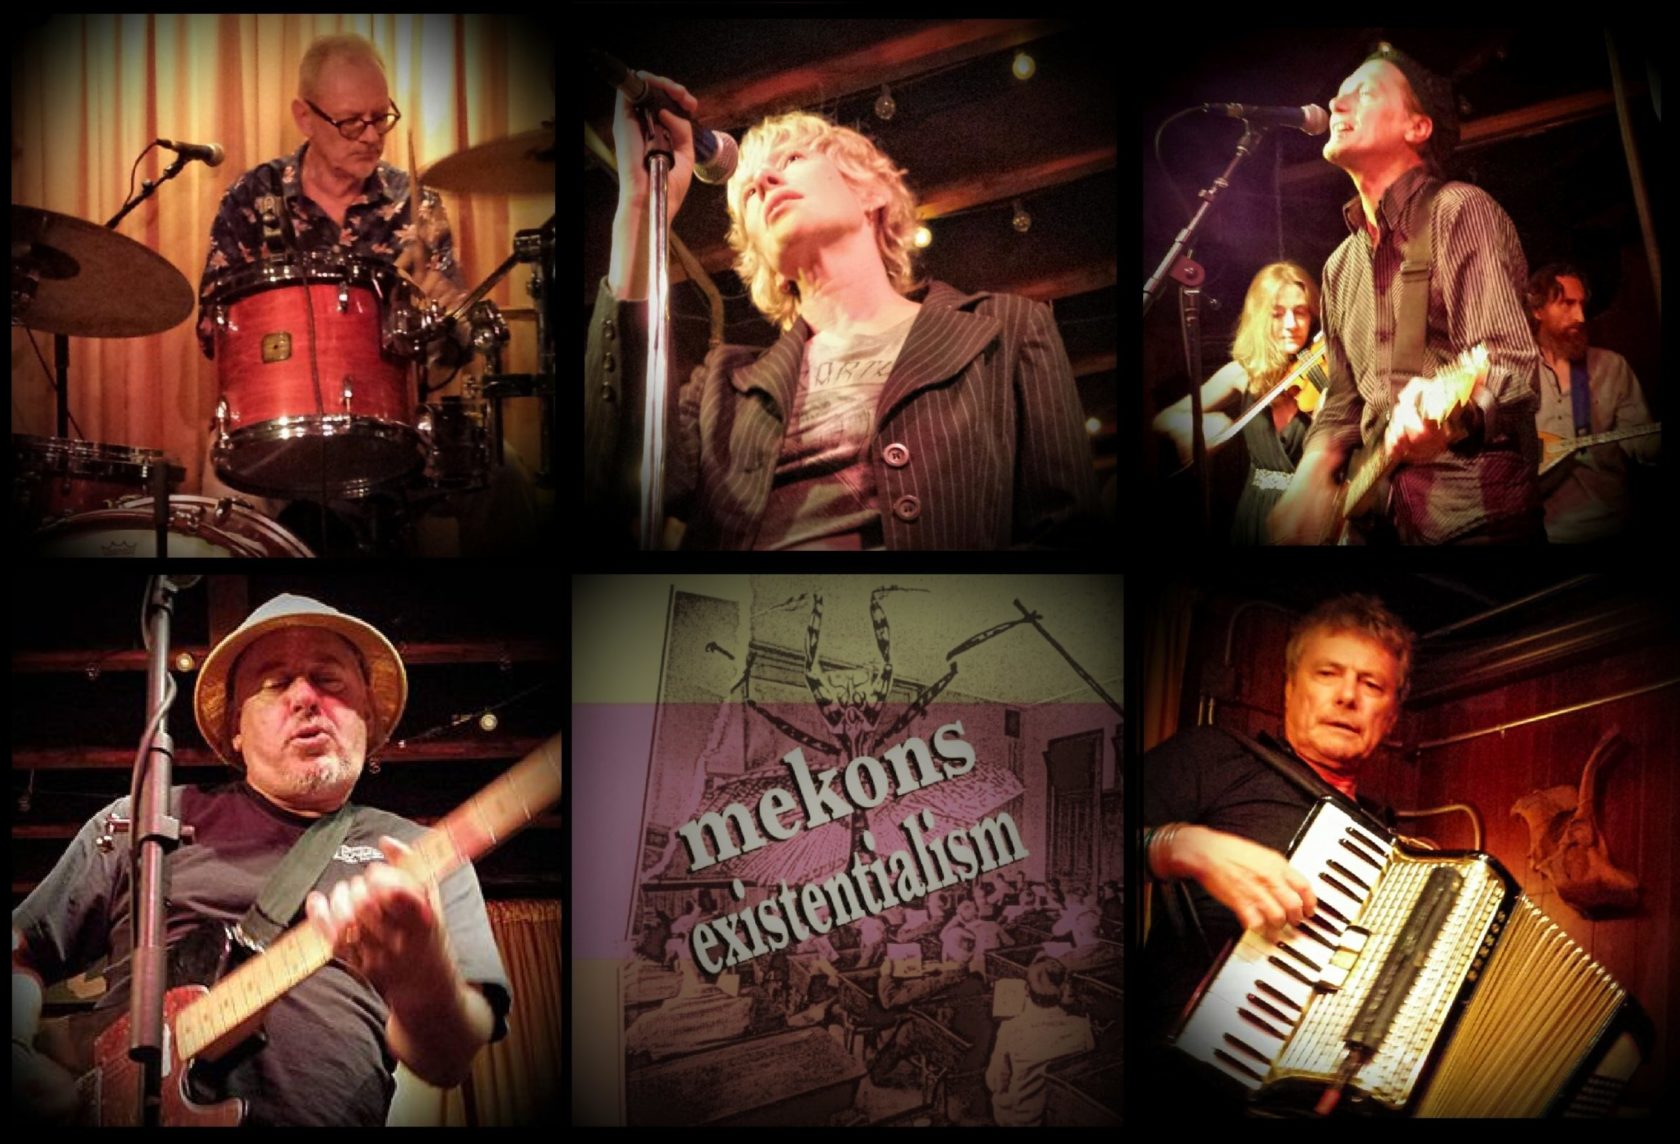 Mekons: This Is What Punk And Survival Look Like